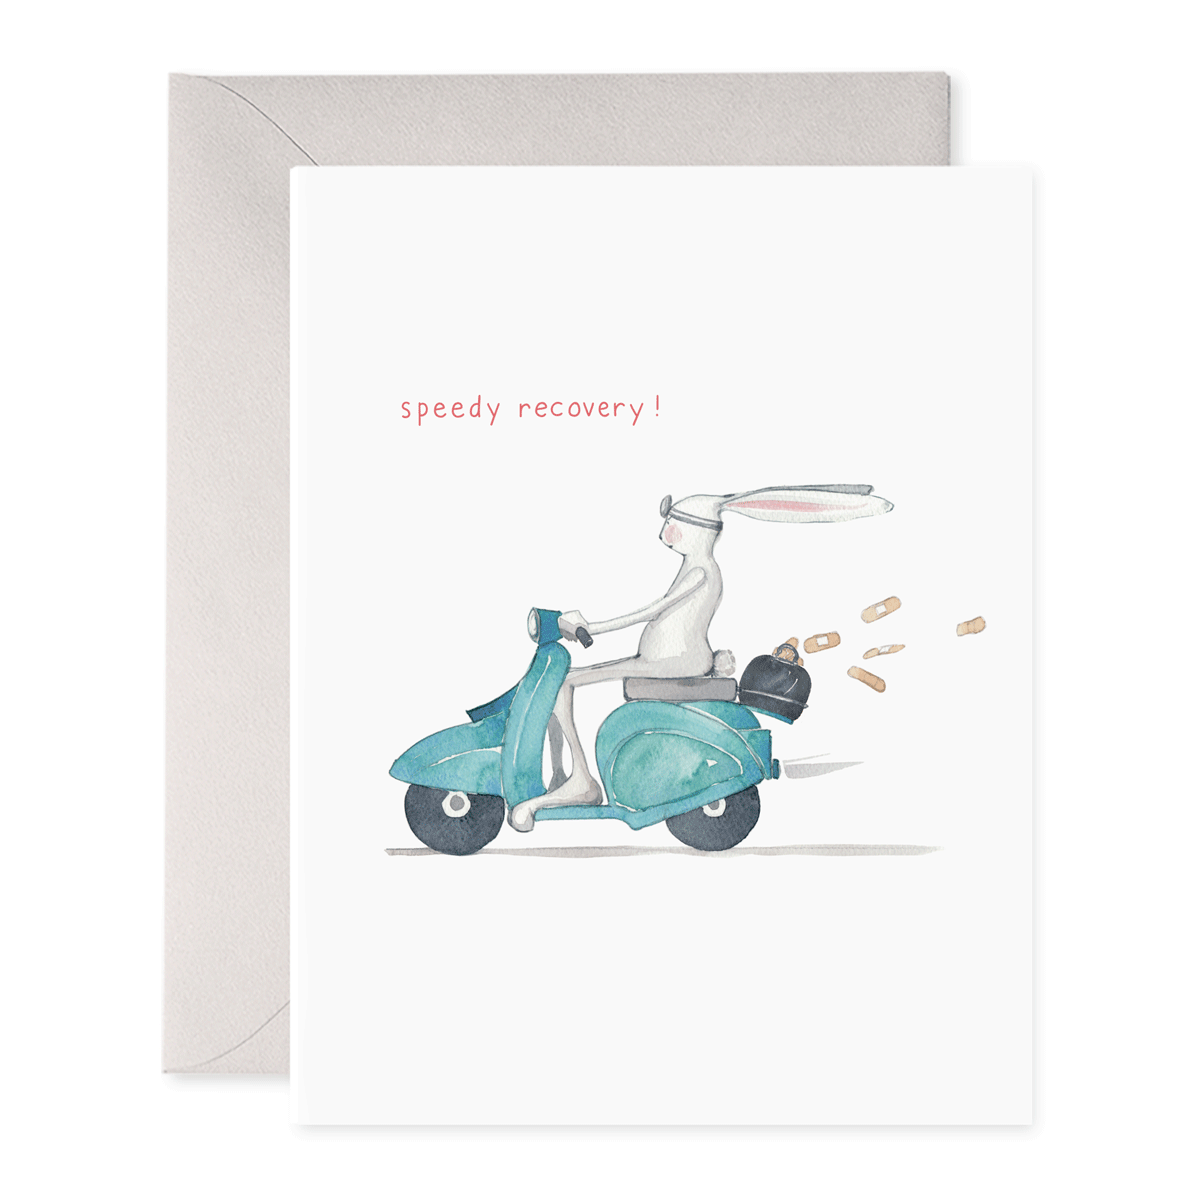 Speedy Recovery | Get Well Greeting Card: 4.25 X 5.5 INCHES